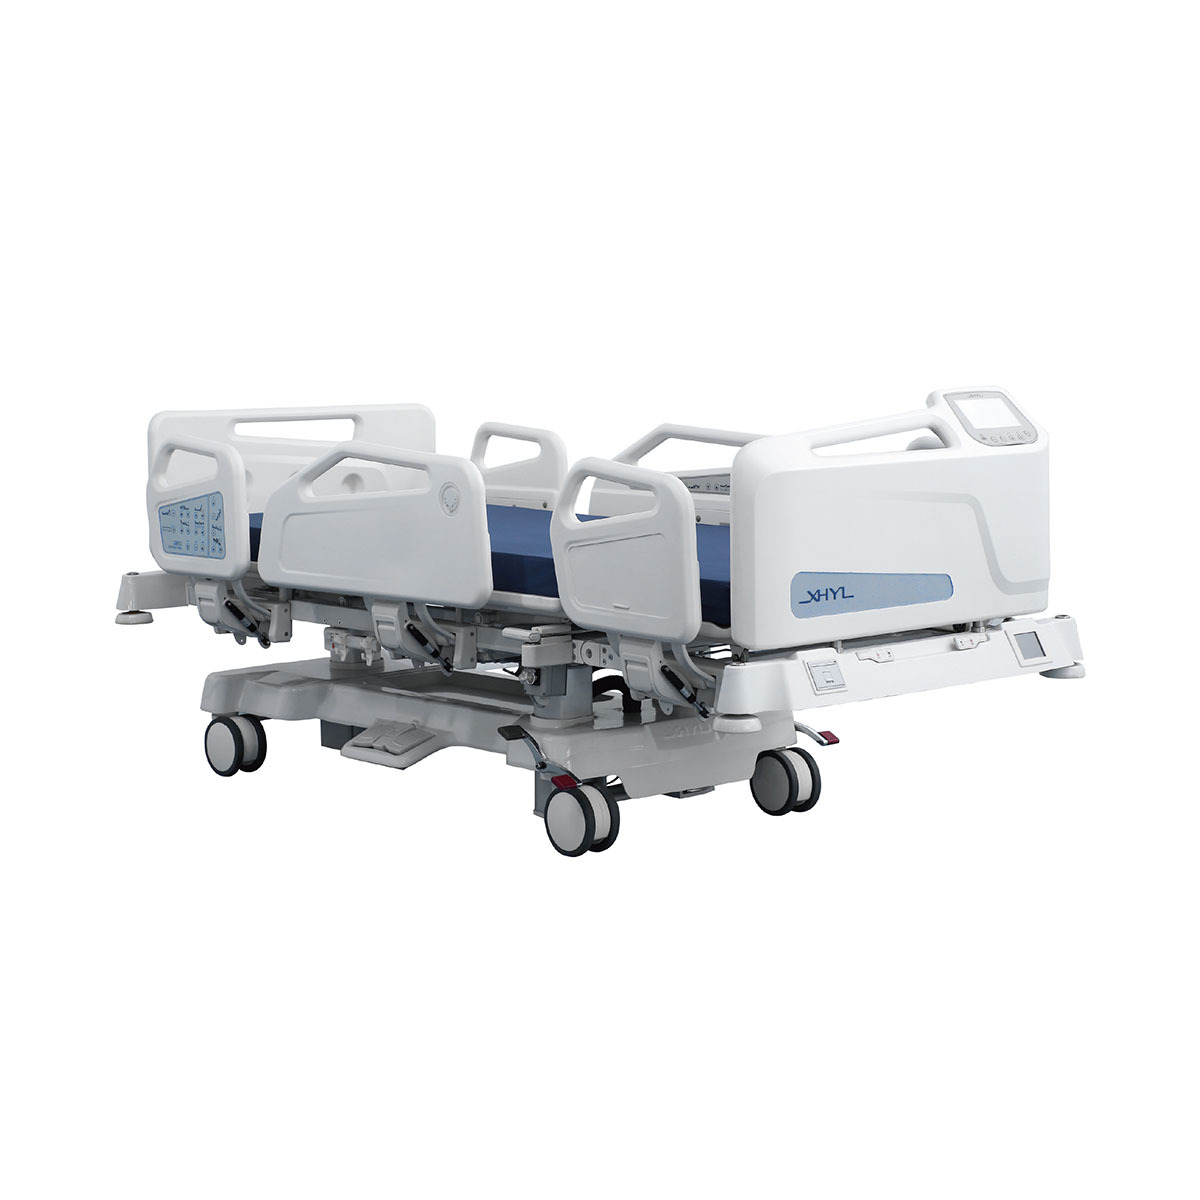 HL-B117A TYPE I Multifunctional ICU Bed